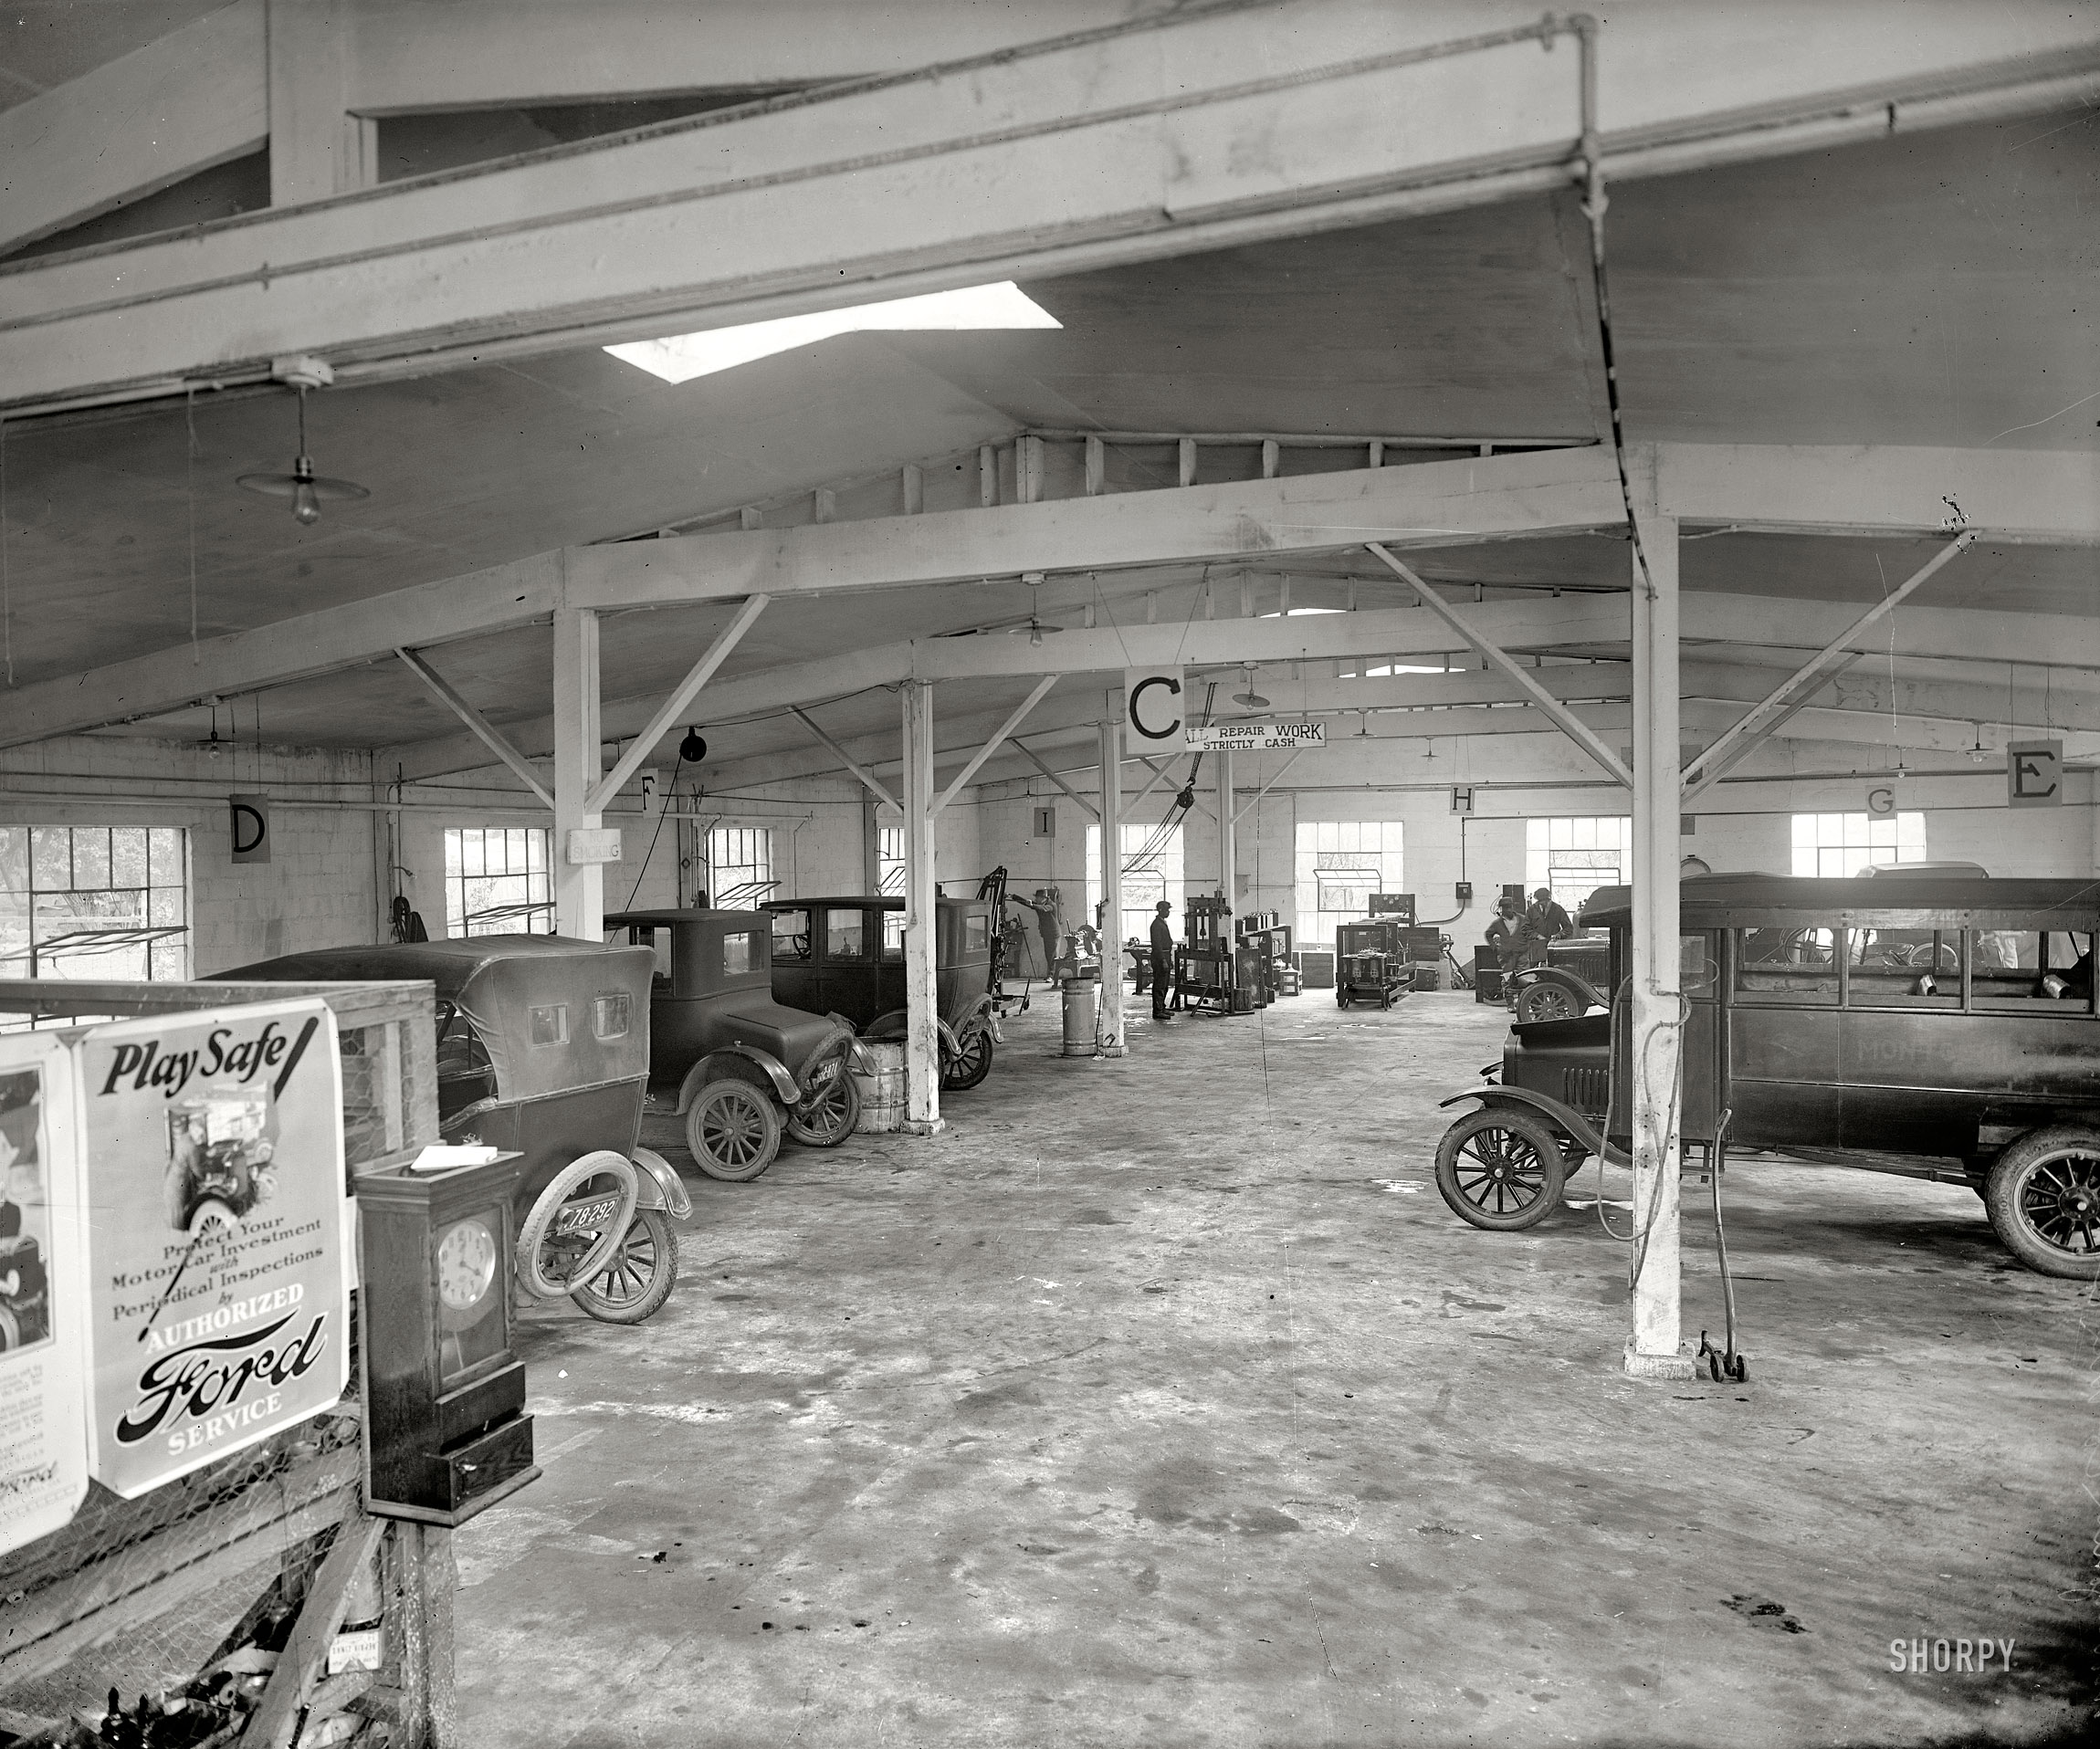 Rockville, Maryland, circa 1925. "Montgomery County Motor Co." Our sixth look behind the scenes at this car dealer. 8x10 glass negative. View full size.